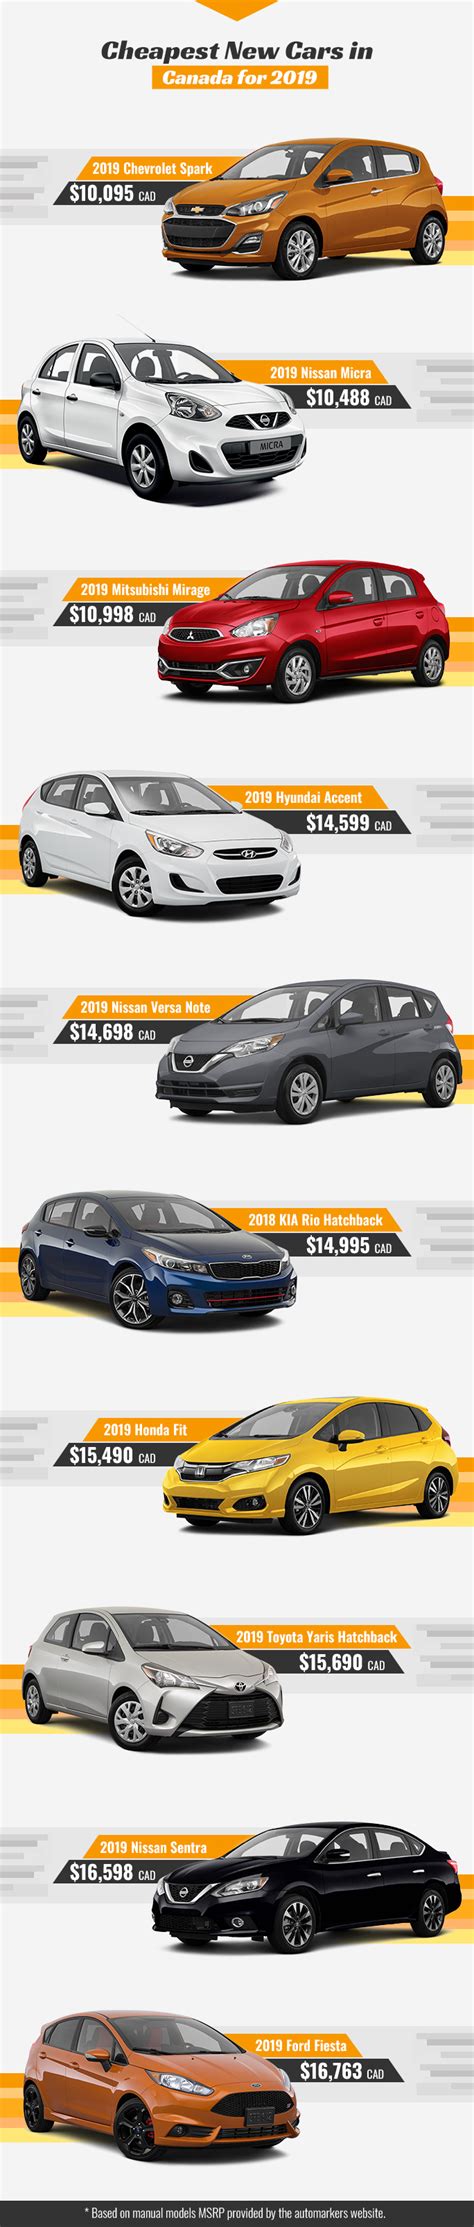 The 10 Cheapest New Cars You Can Buy In Canada For 2019 Cheap Cars